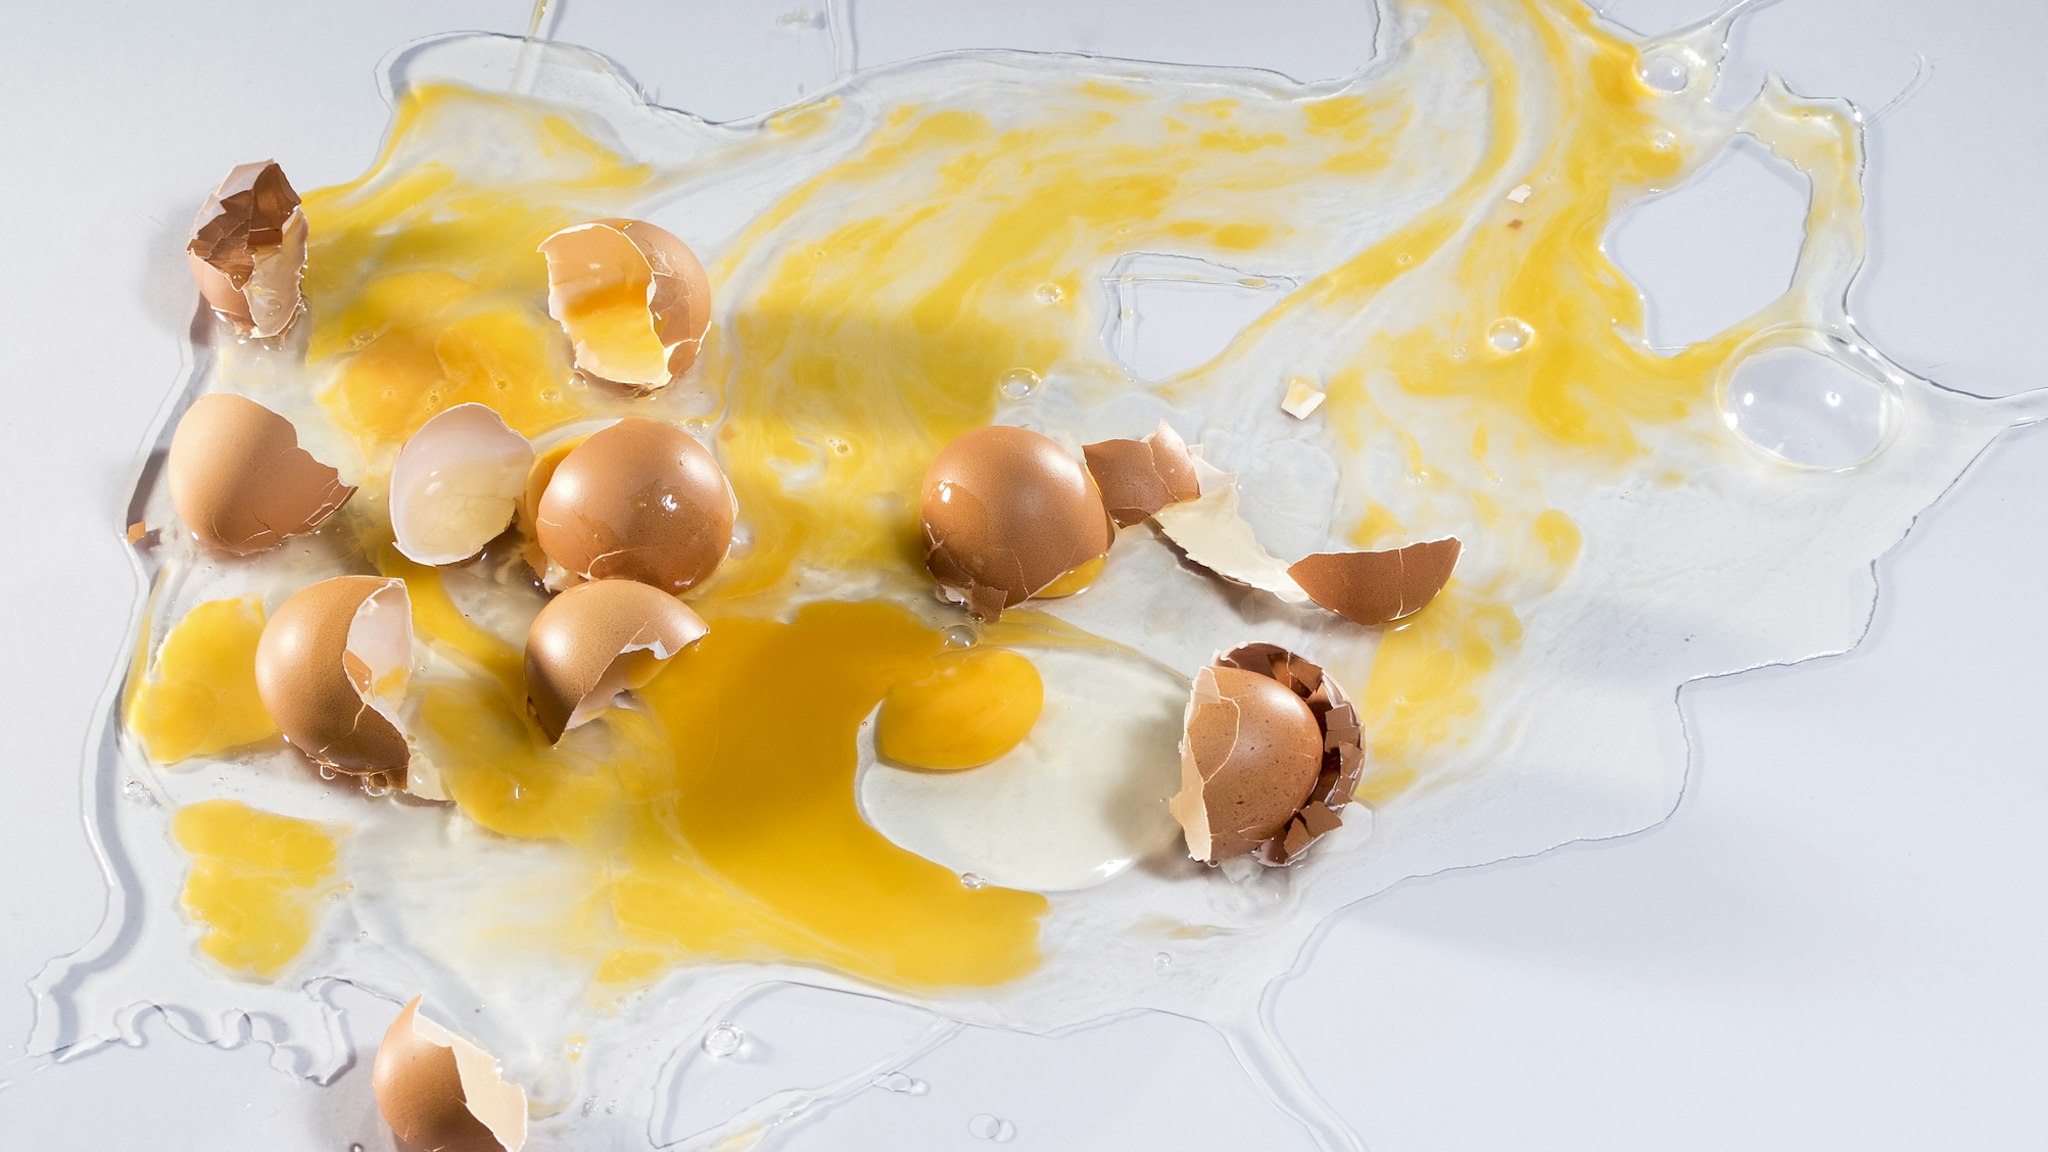 Complete setting of eggs broken by impacts on a white surface - stock photo